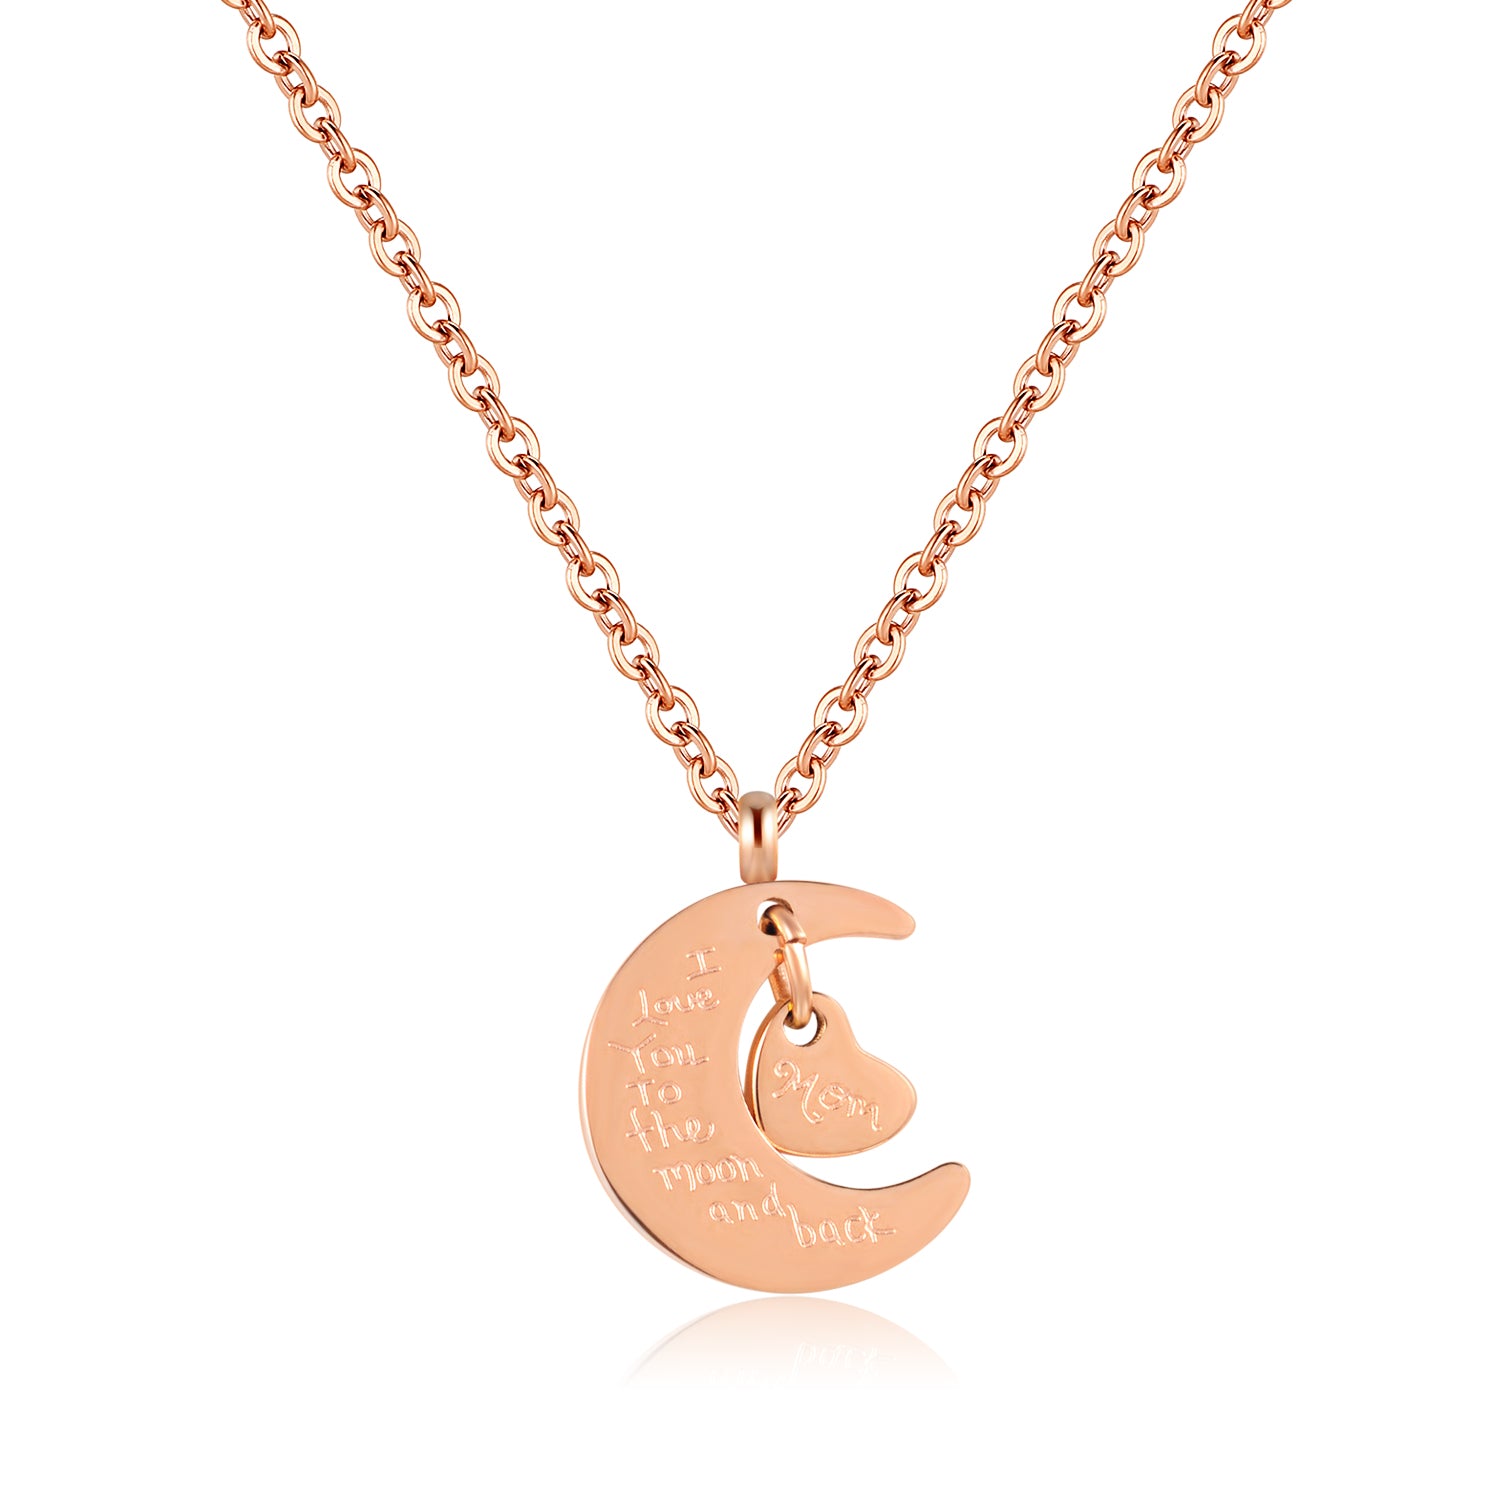 Avita "Love" 18K Rose Gold Plated Stainless Steel Half Moon Mom Heart Necklace